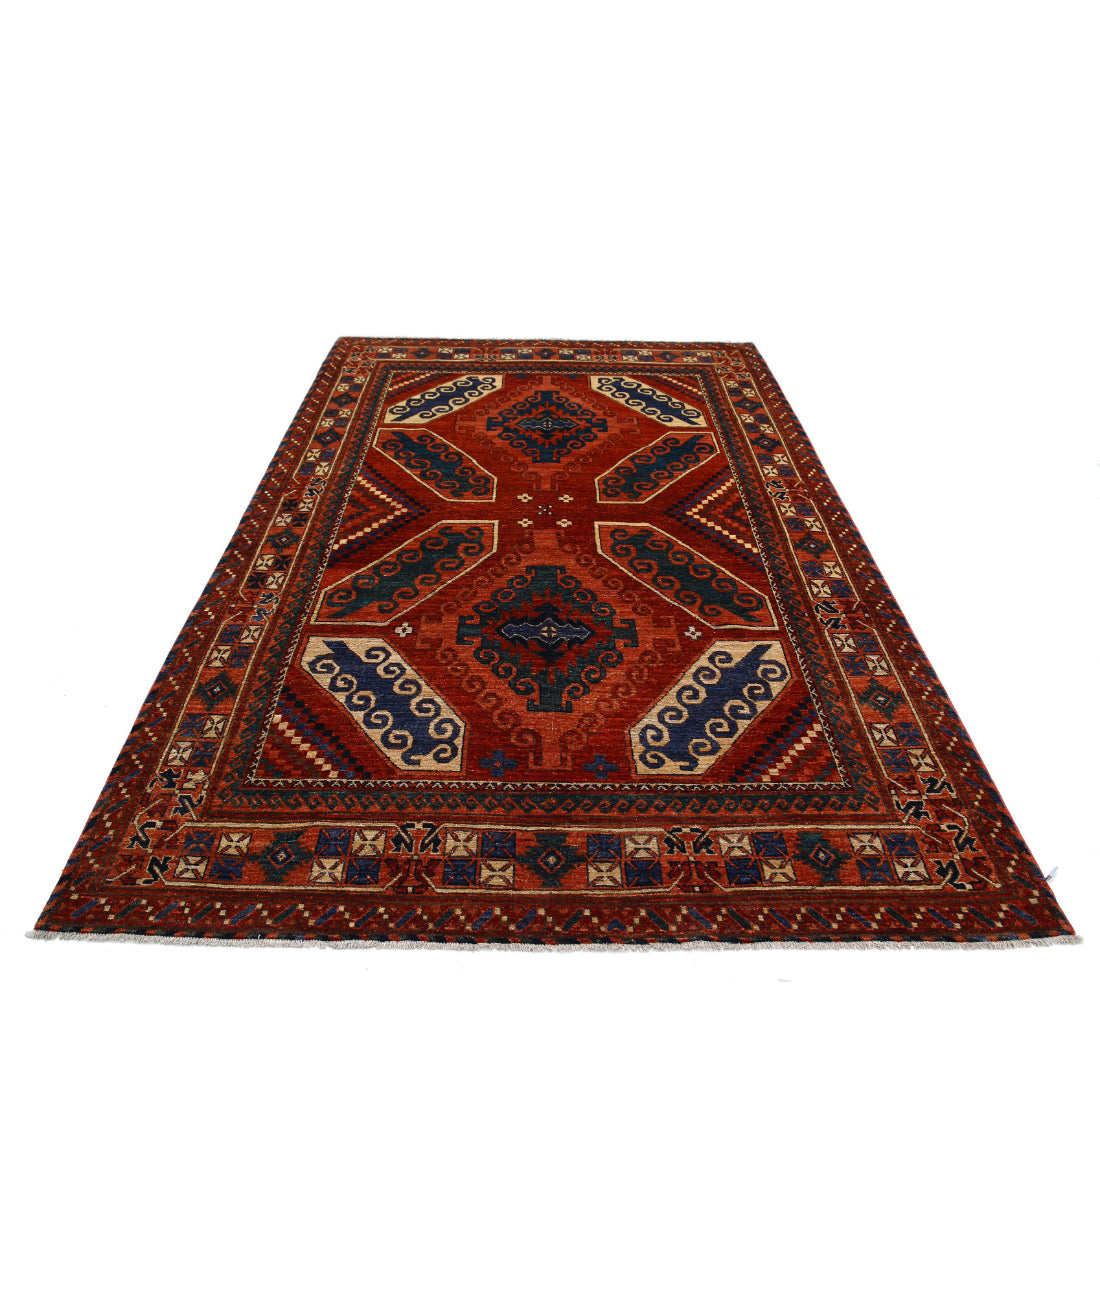 Hand Knotted Nomadic Caucasian Humna Wool Rug - 6'5'' x 9'4'' 6'5'' x 9'4'' (193 X 280) / Red / Red